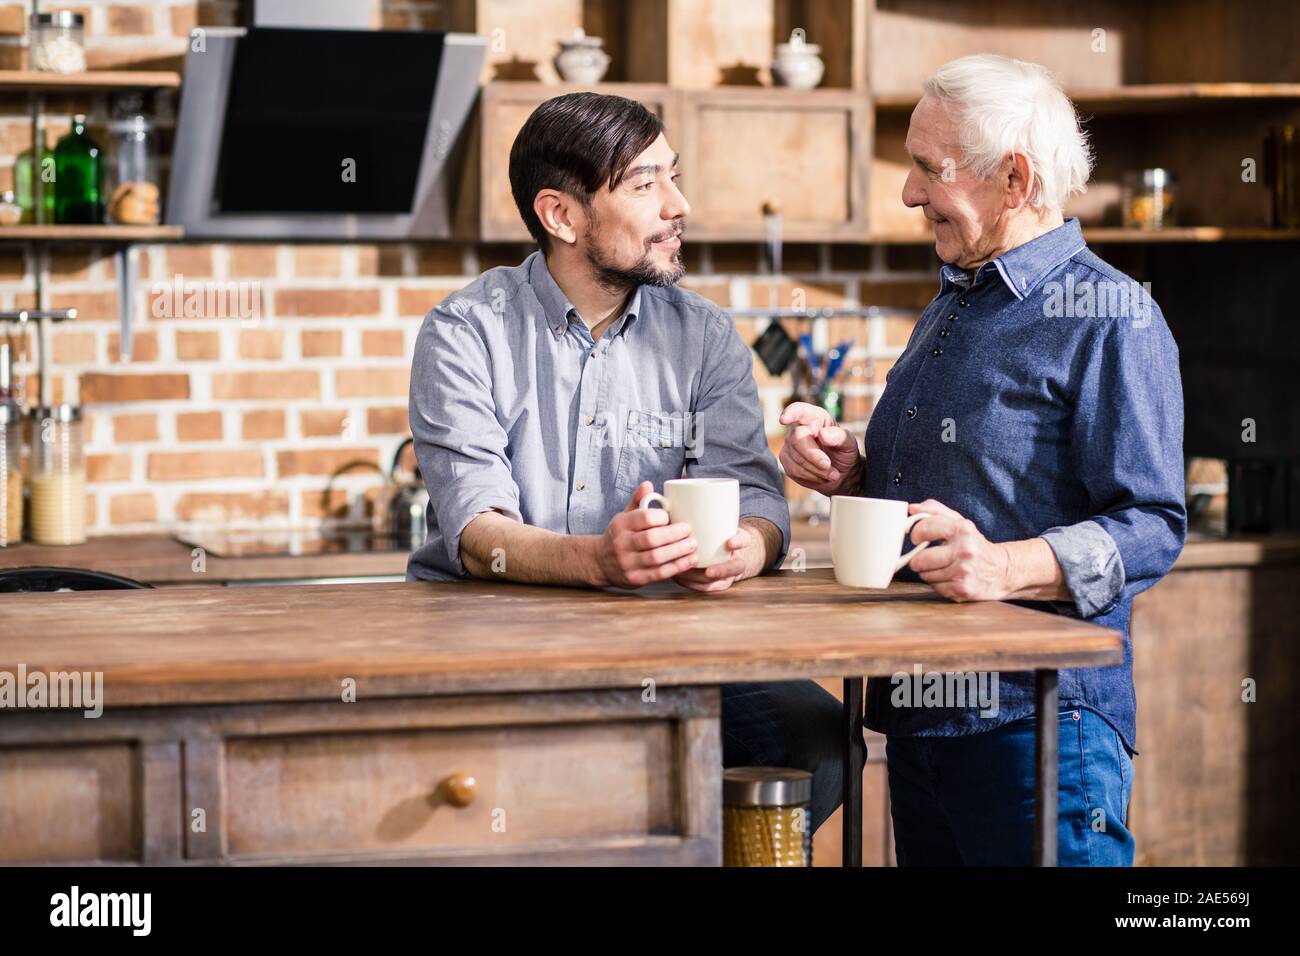 Positive man drinking coffee with his elderly father Stock Photo